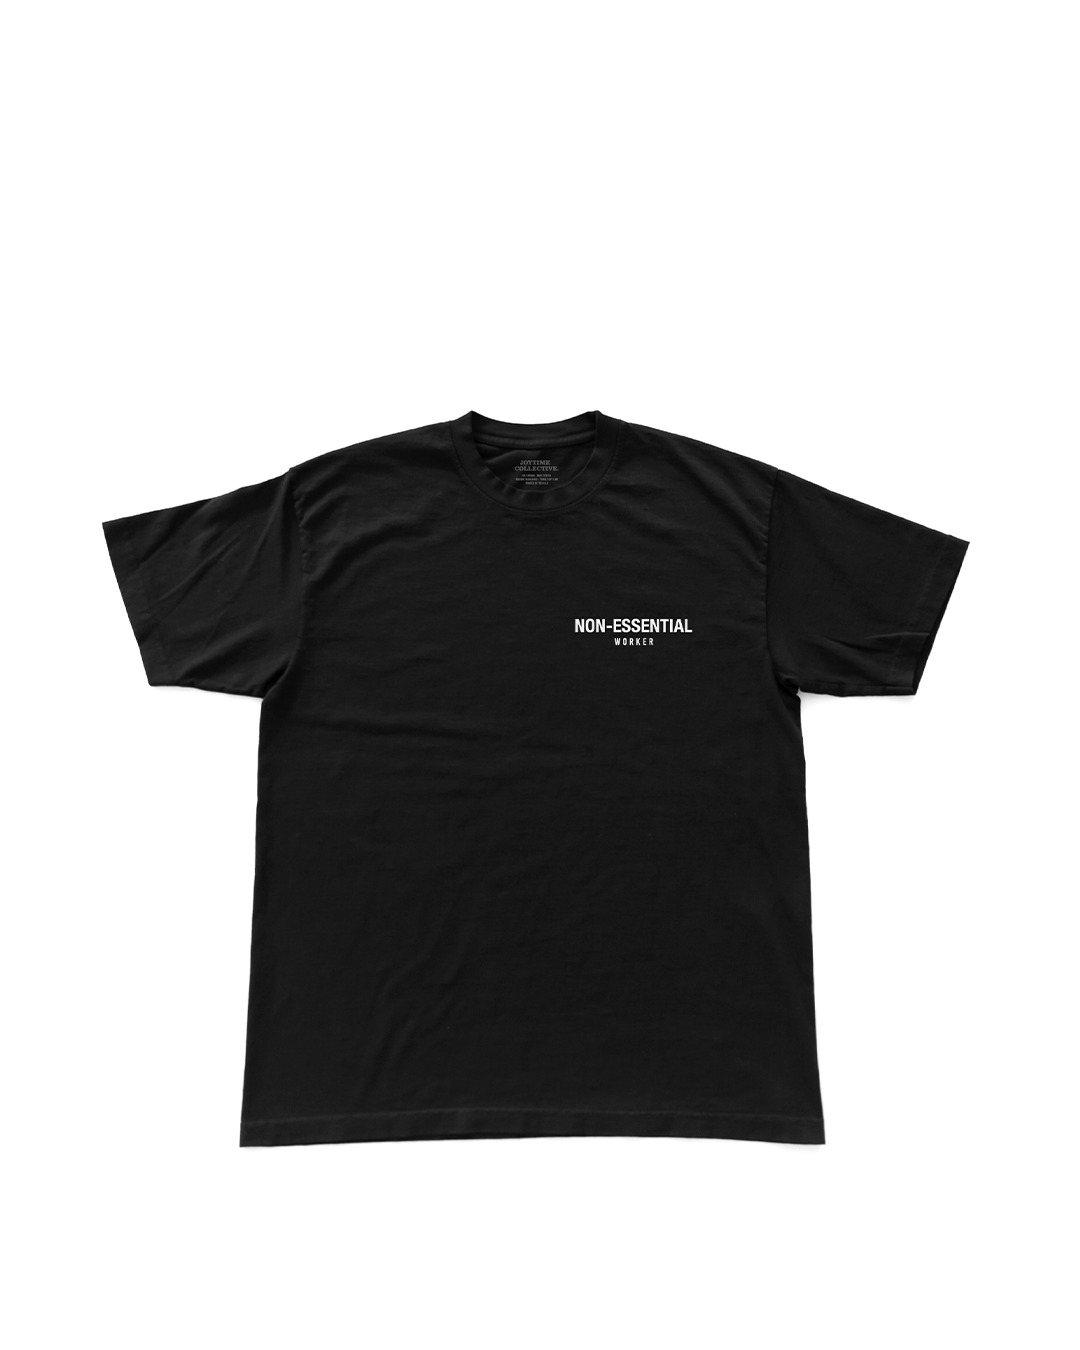 Joytime Collective Non-Essential Worker T-Shirt